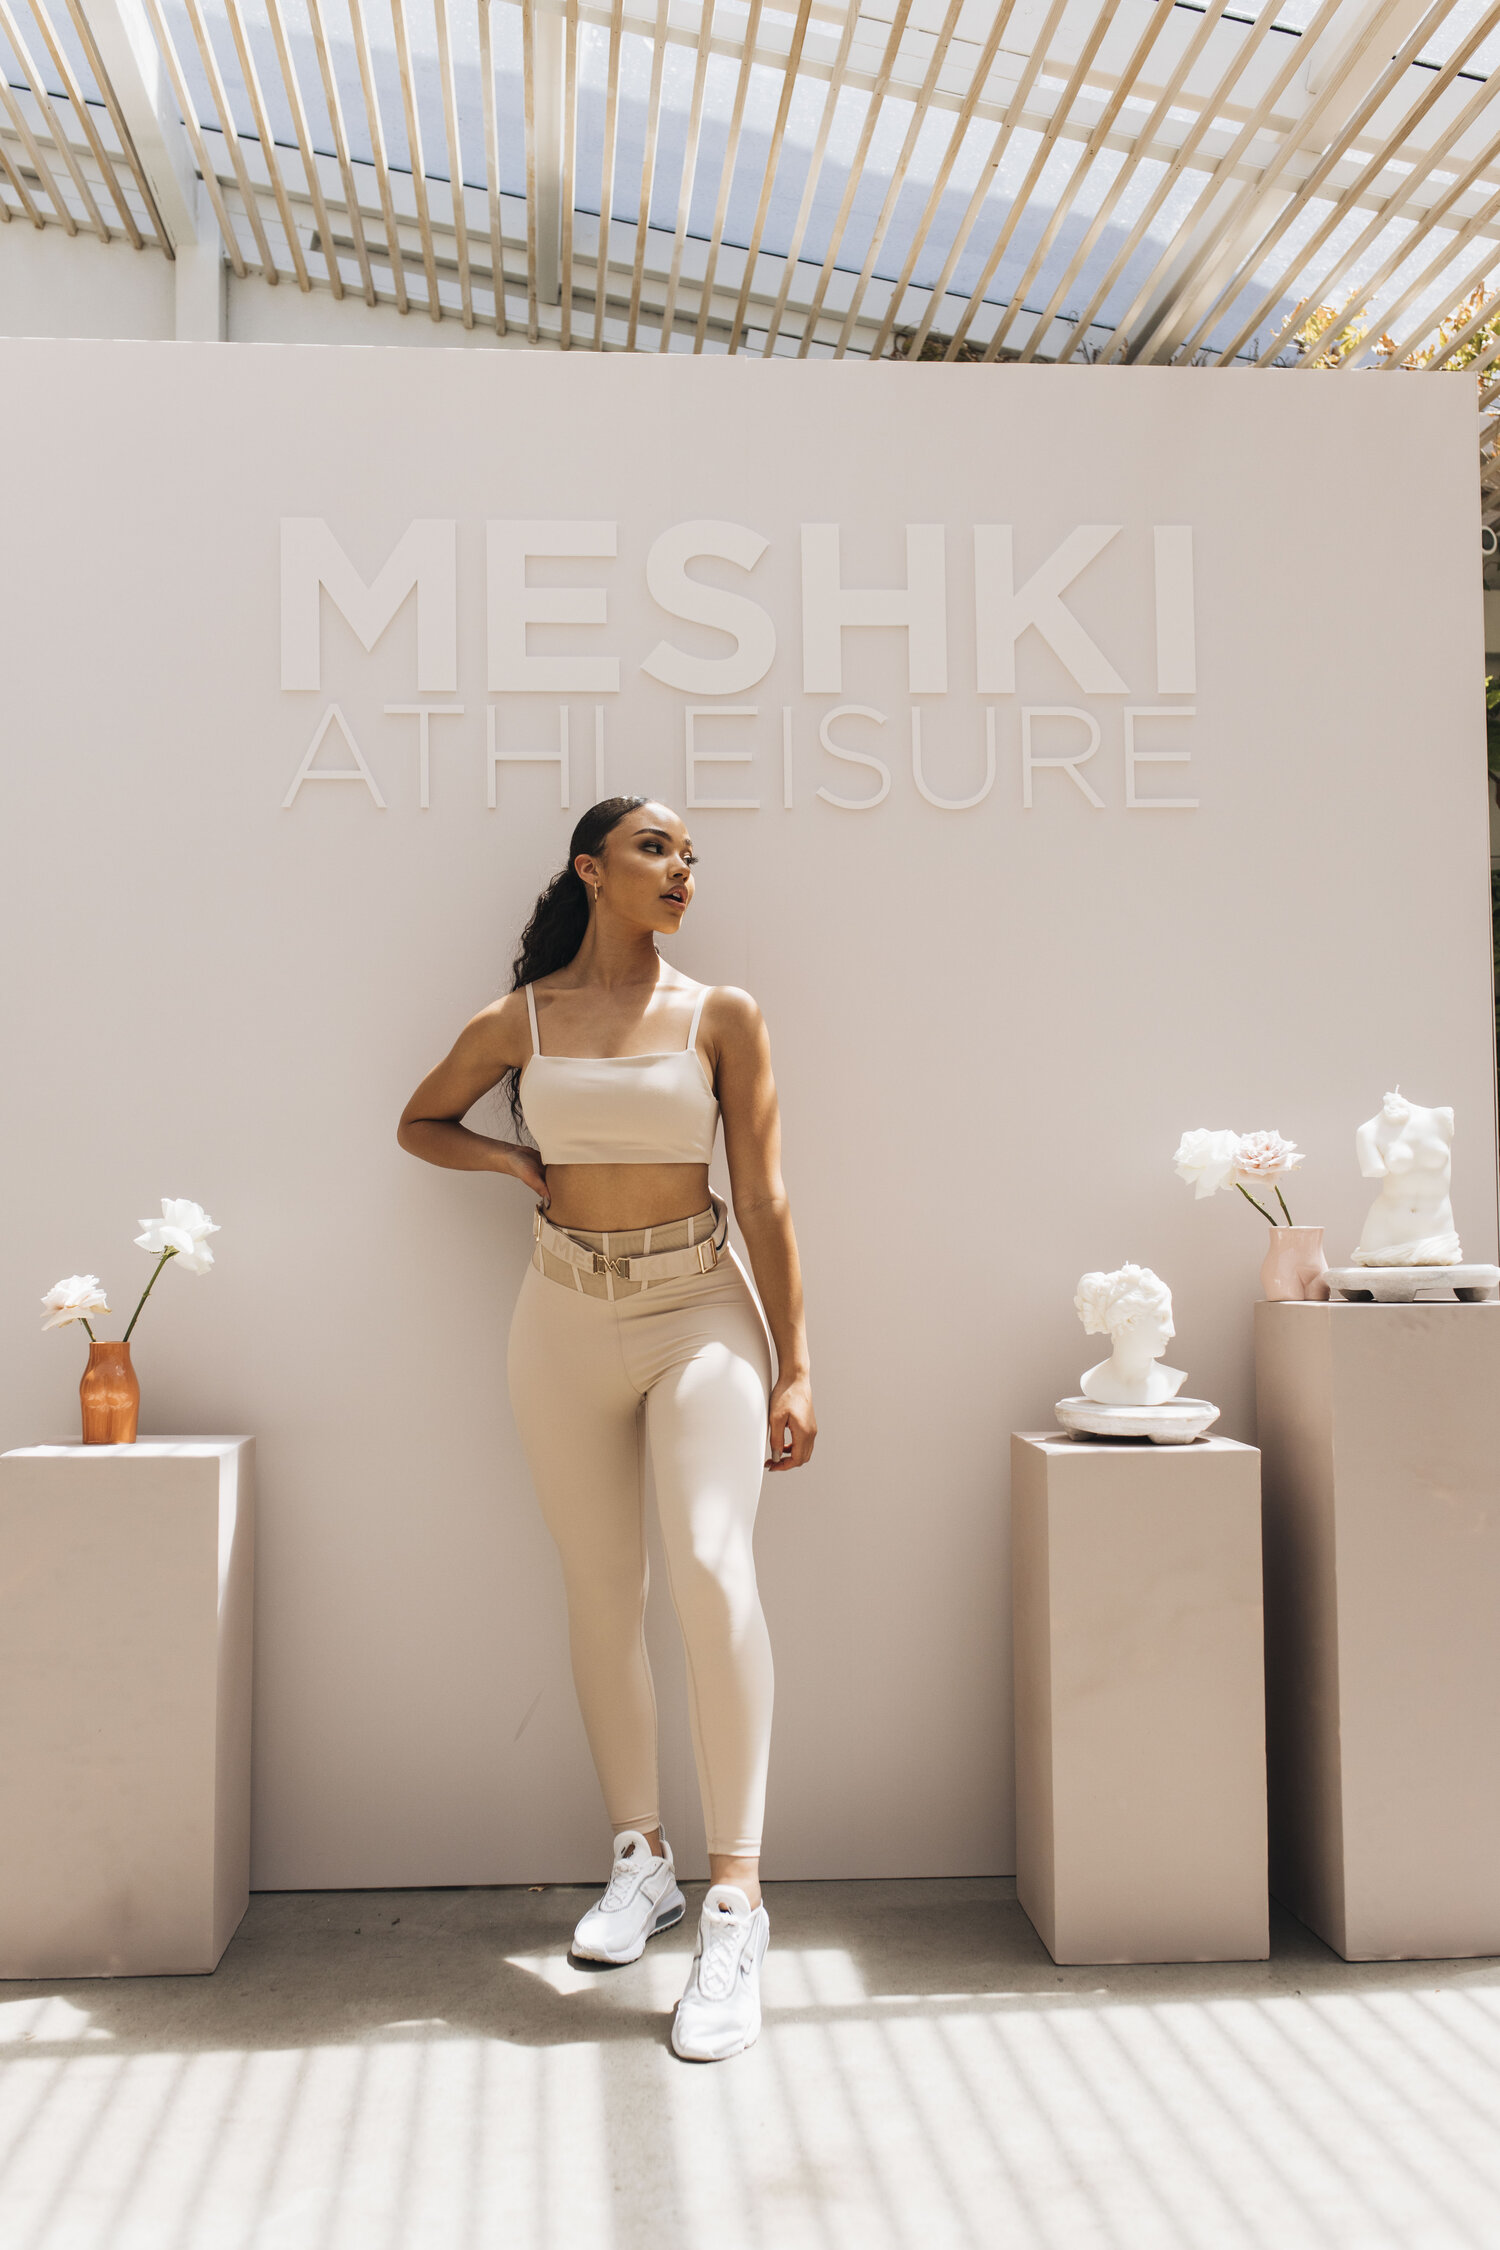 withsmee-sydney-event-stylist-meshki-product-launch-25